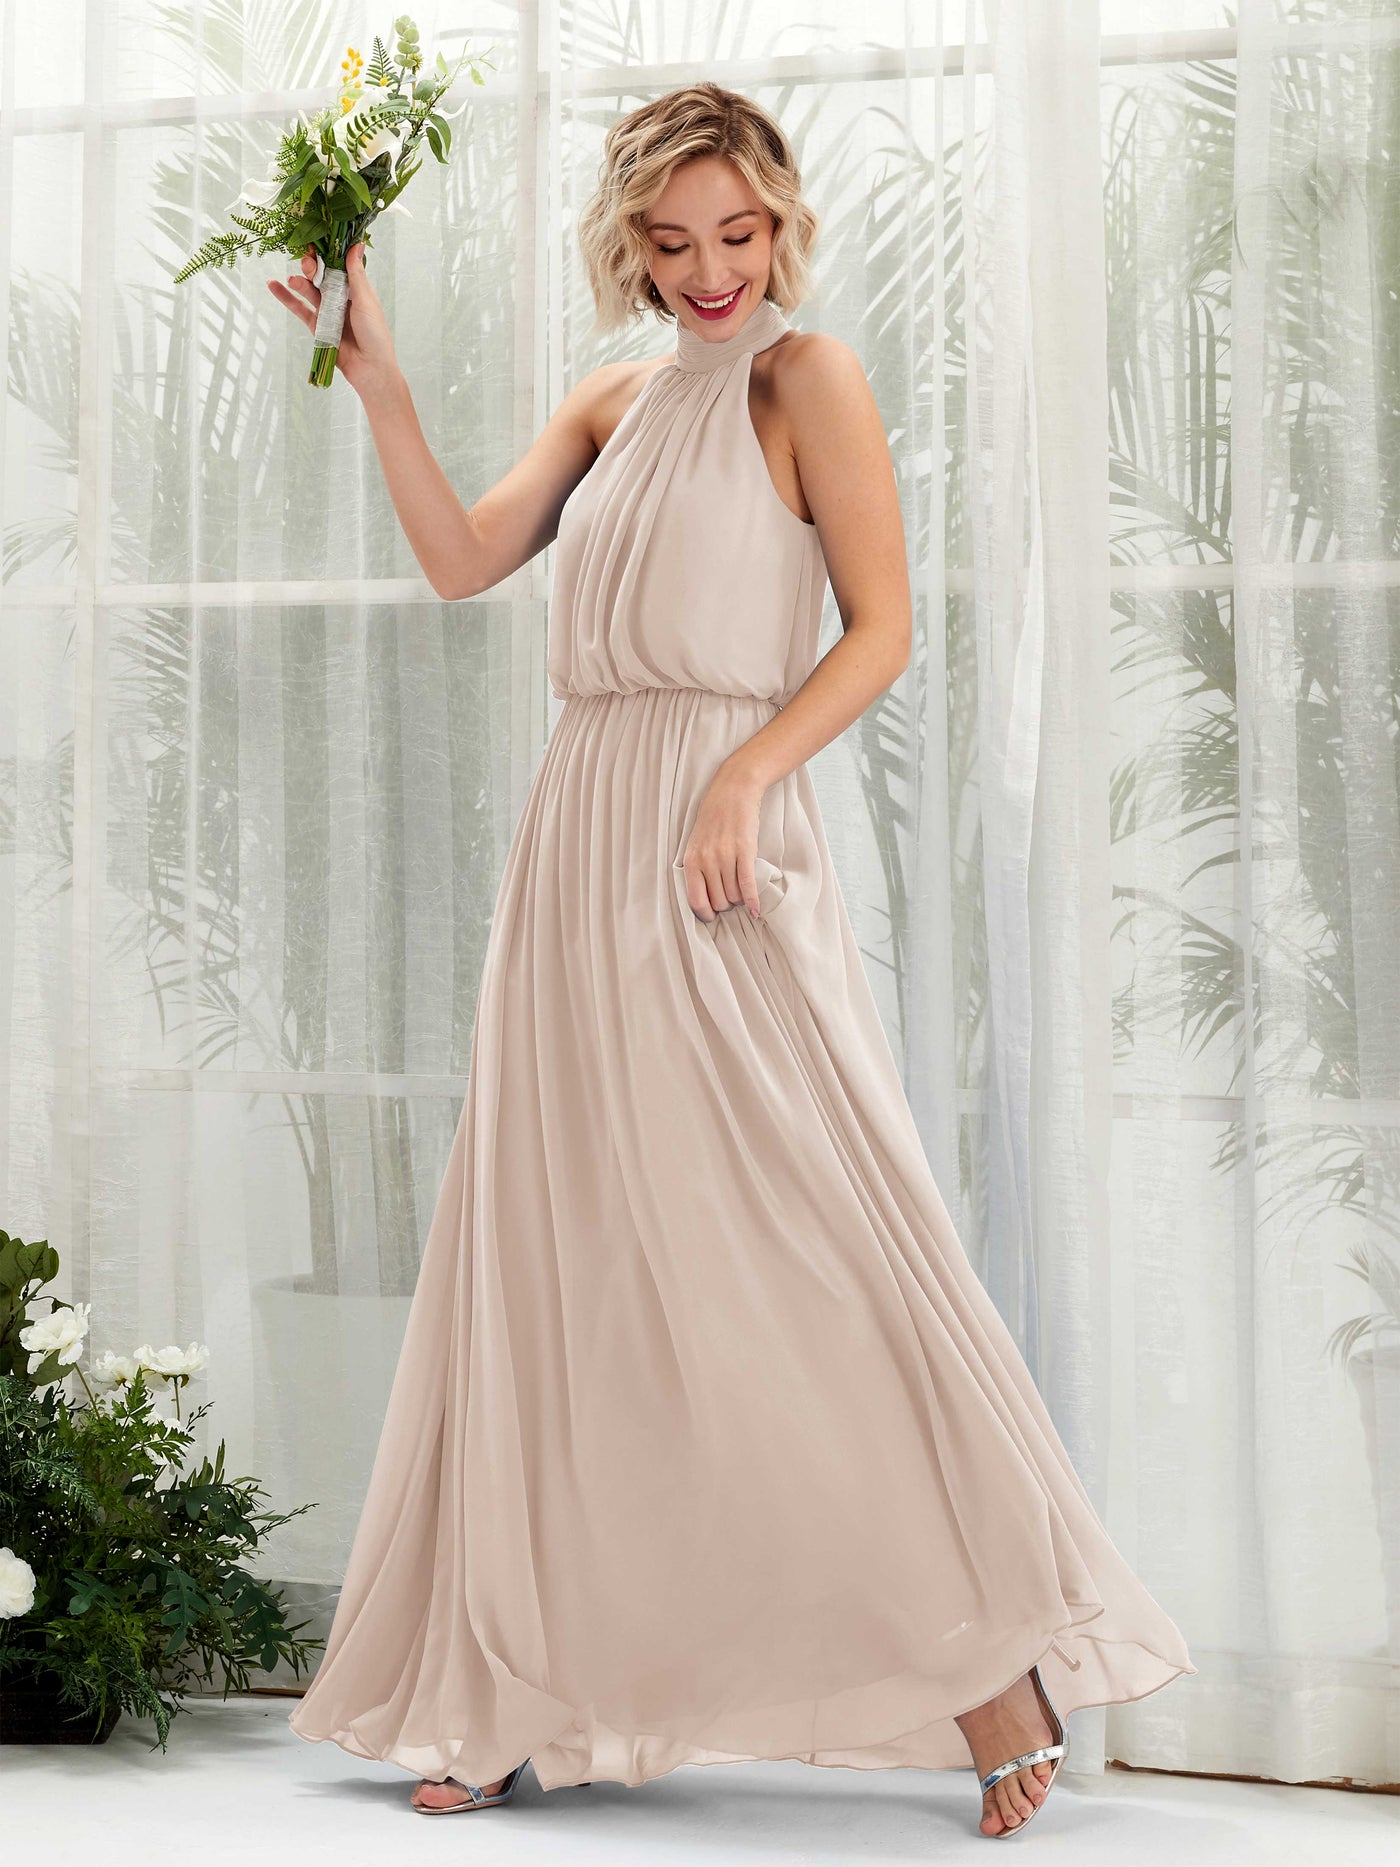 Champagne Bridesmaid Dresses Bridesmaid Dress A-line Chiffon Halter Full Length Sleeveless Wedding Party Dress (81222916)#color_champagne